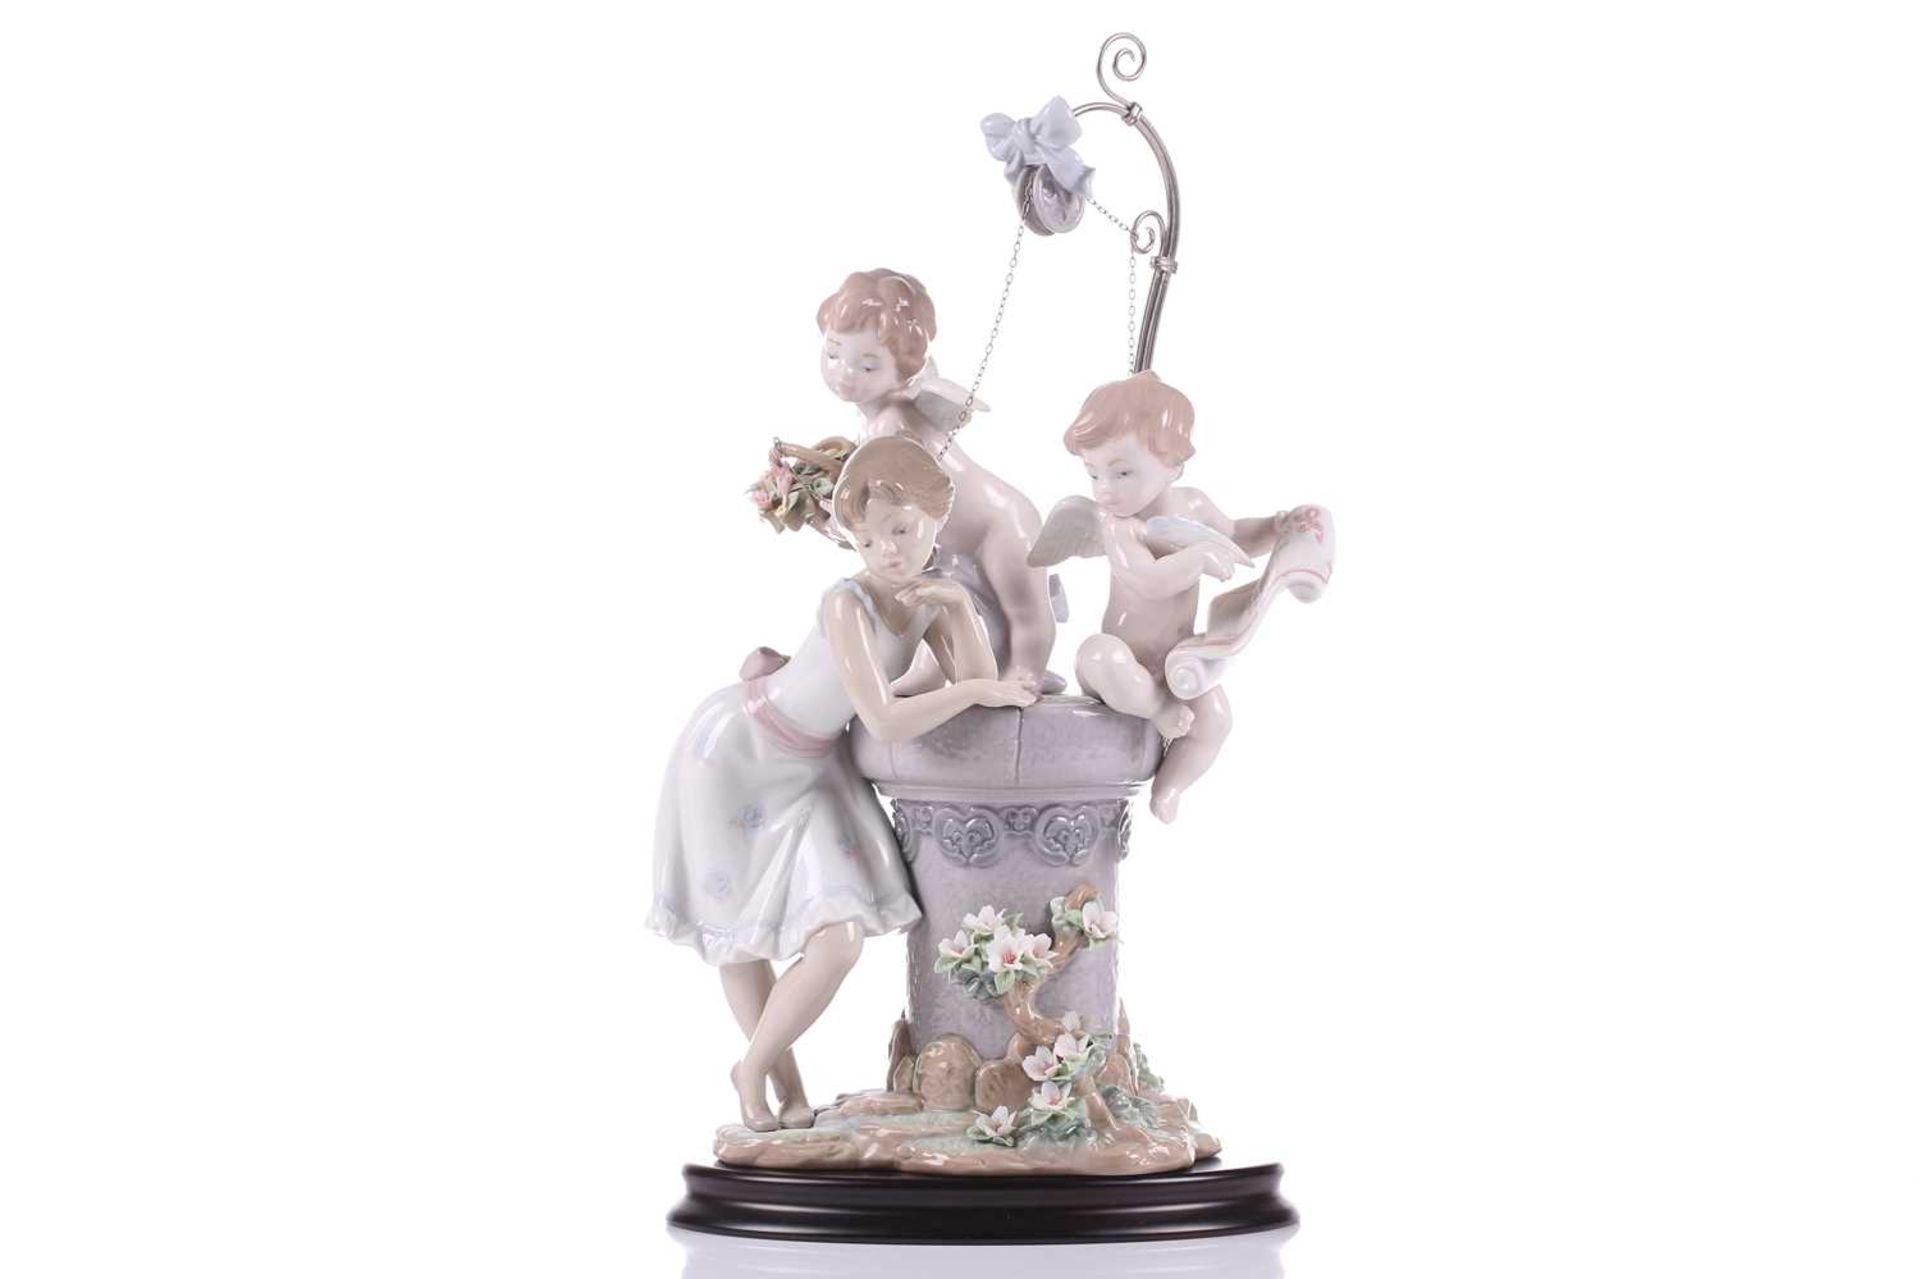 A Lladro porcelain ltd edition 516/2000 figure group "May my wish come true" modelled by the masters - Image 4 of 10